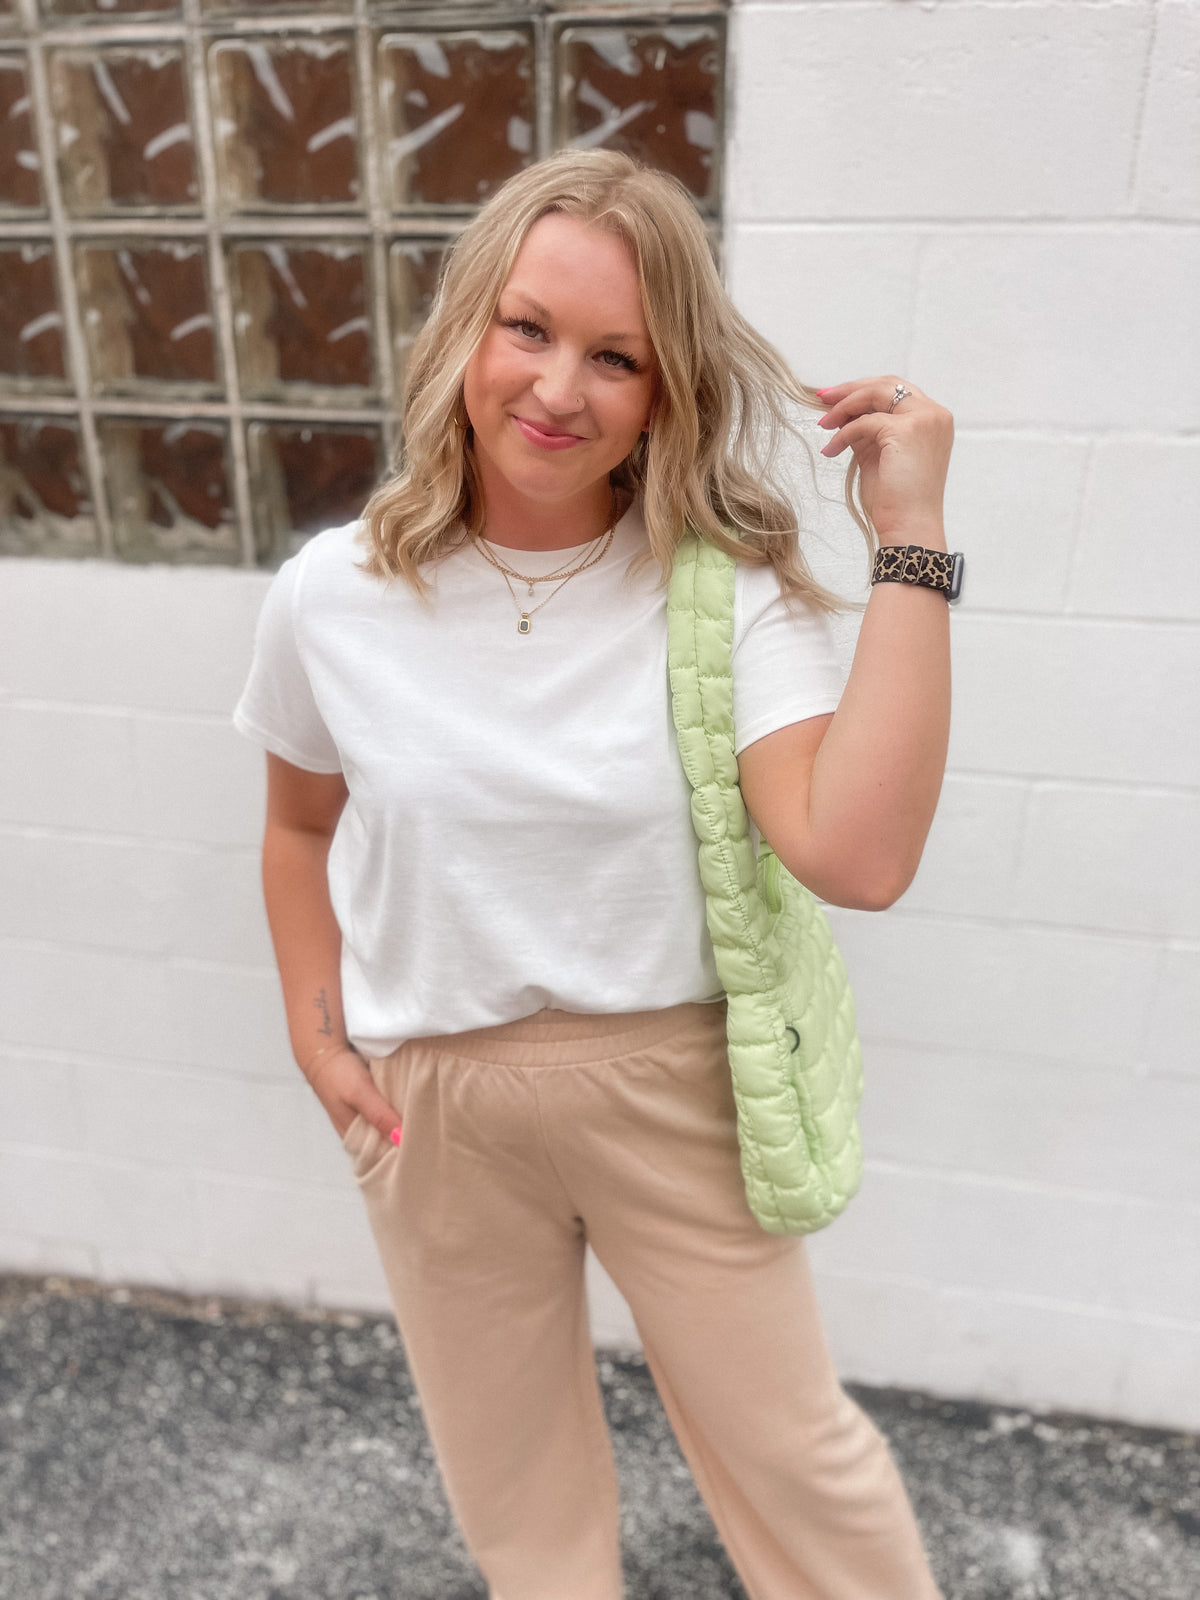 Lime Quilted Slouchy Bag